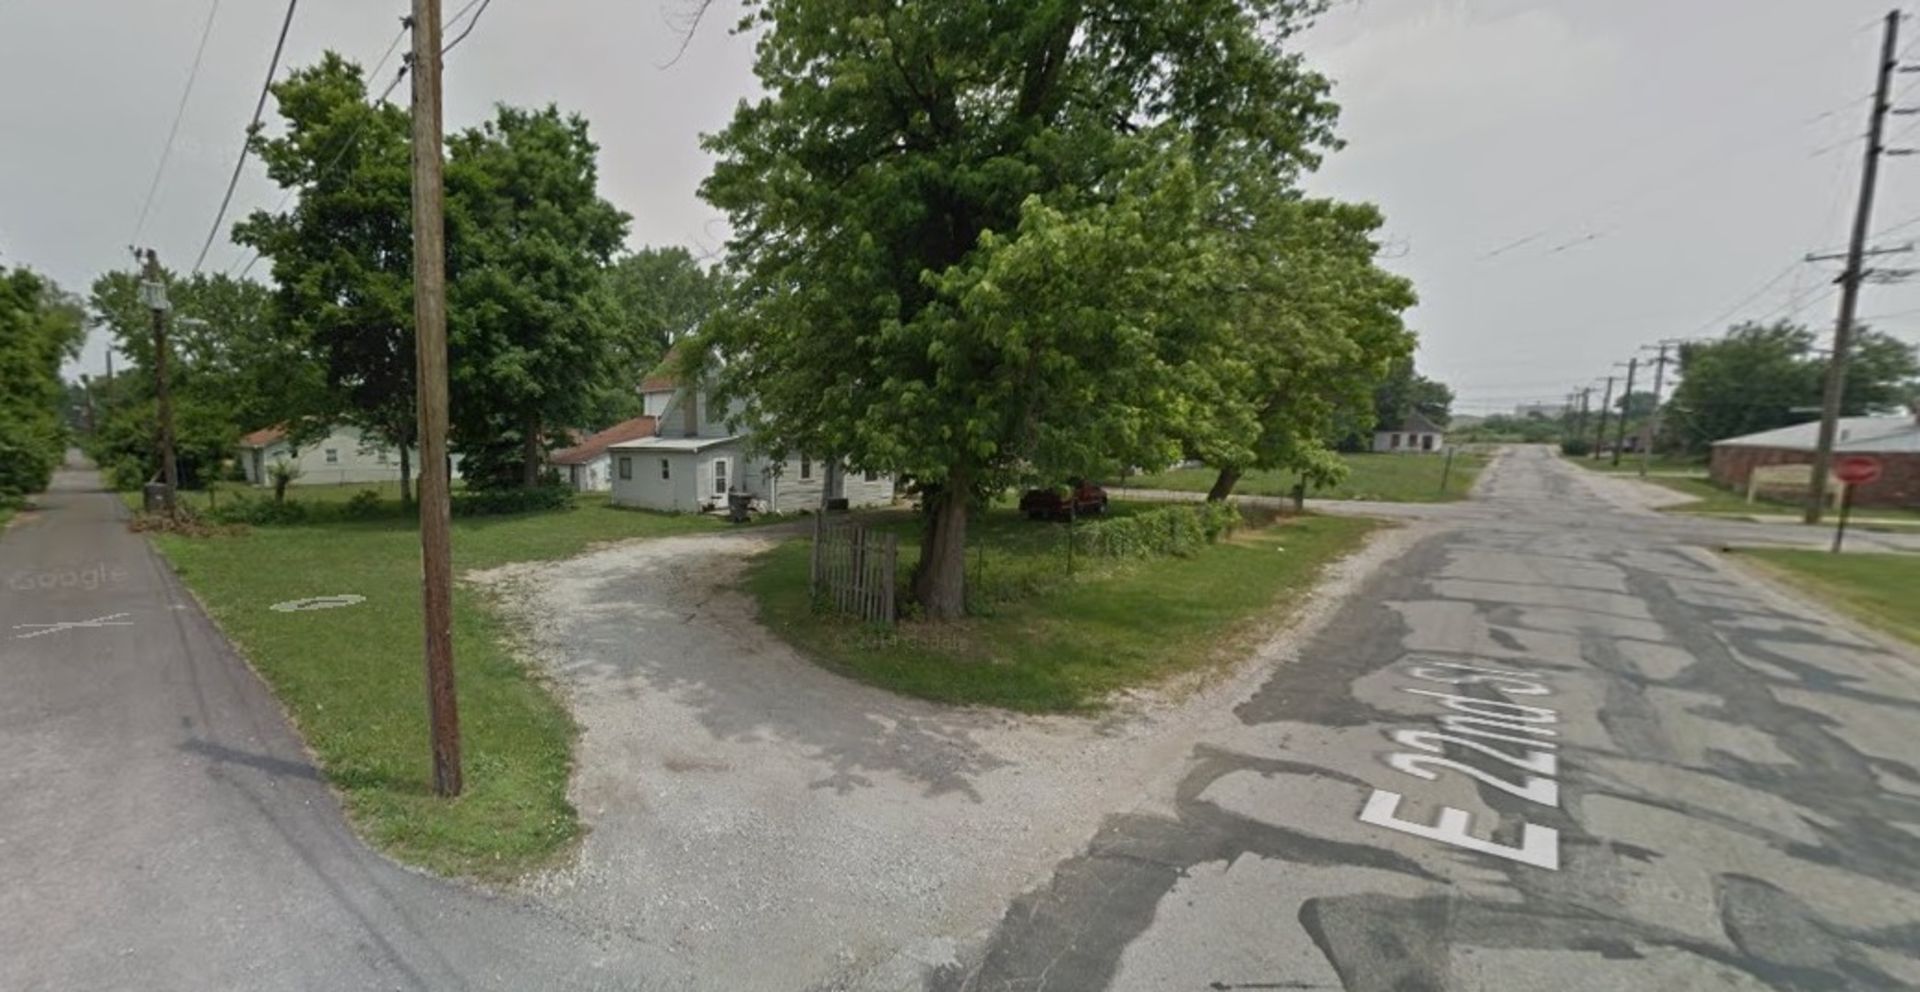 2202 SHELDON ST, INDIANAPOLIS, INDIANA 46218   NICE RESIDENTIAL PLOT OF LAND WITH MATURE TREES! GOOD - Image 4 of 12